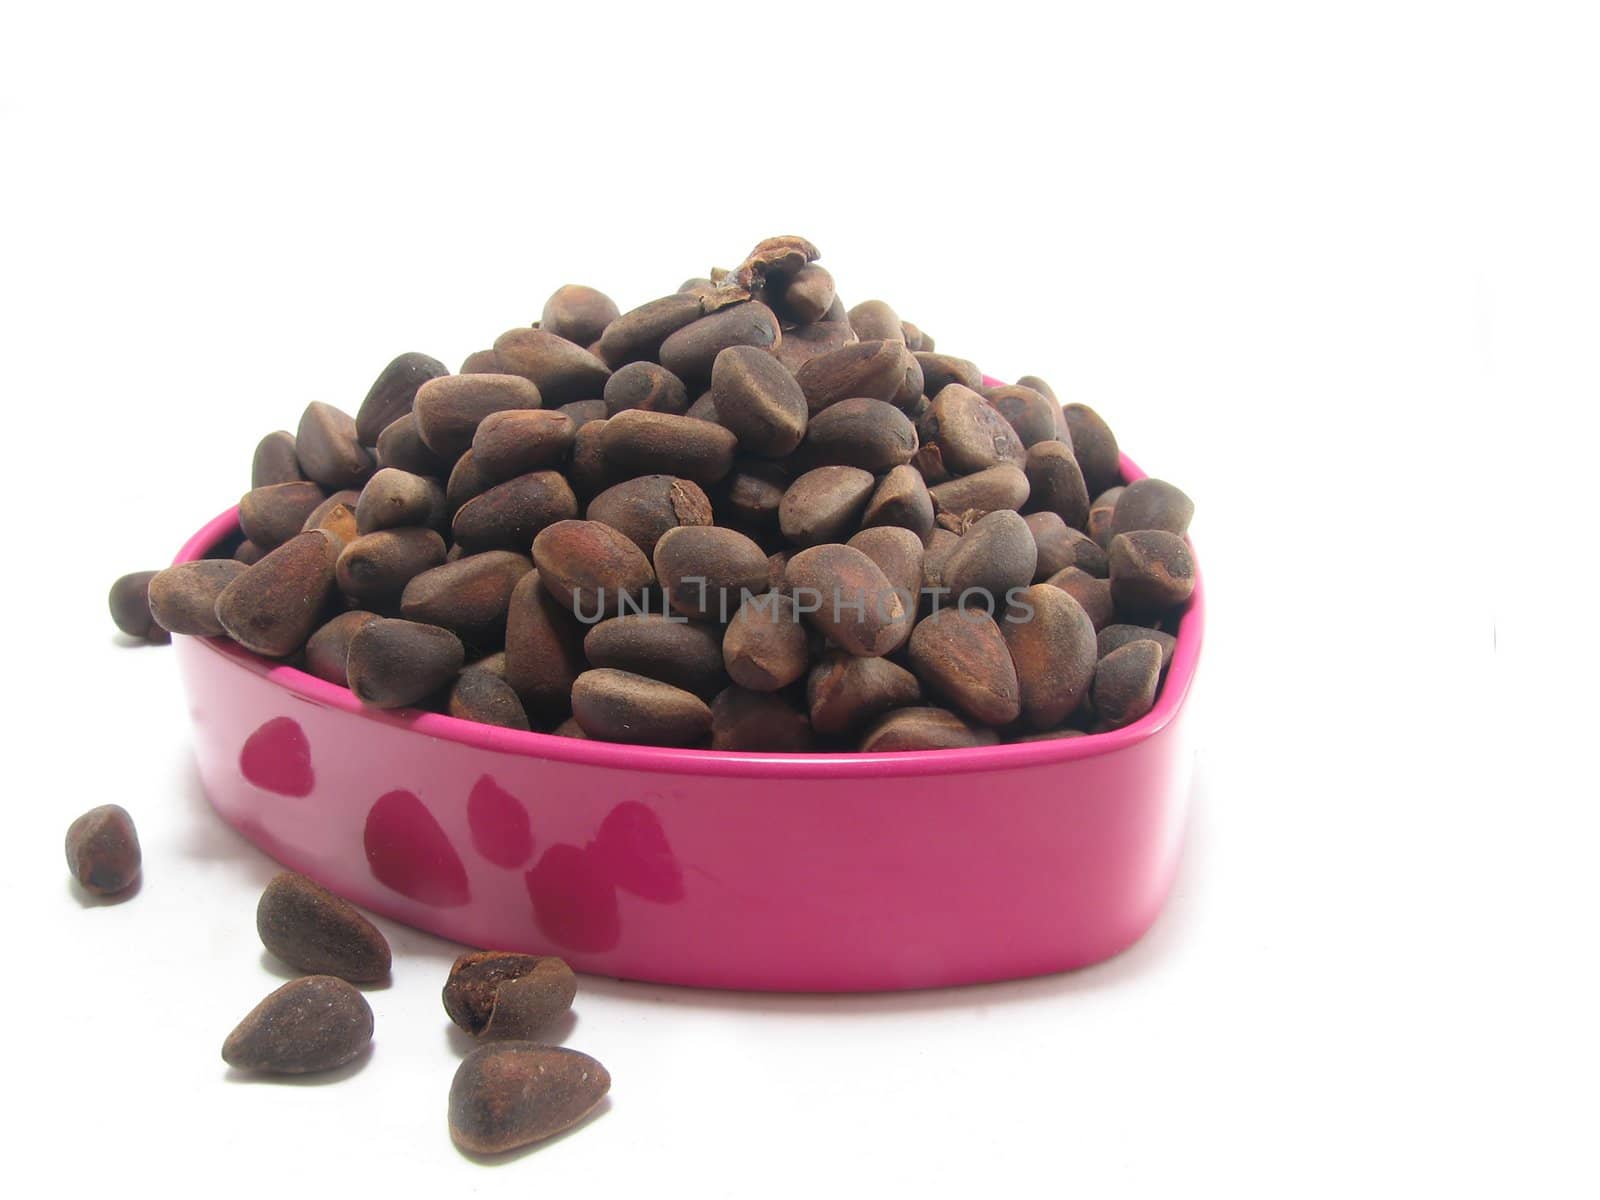 Coffee beans in a pink box by Svetovid